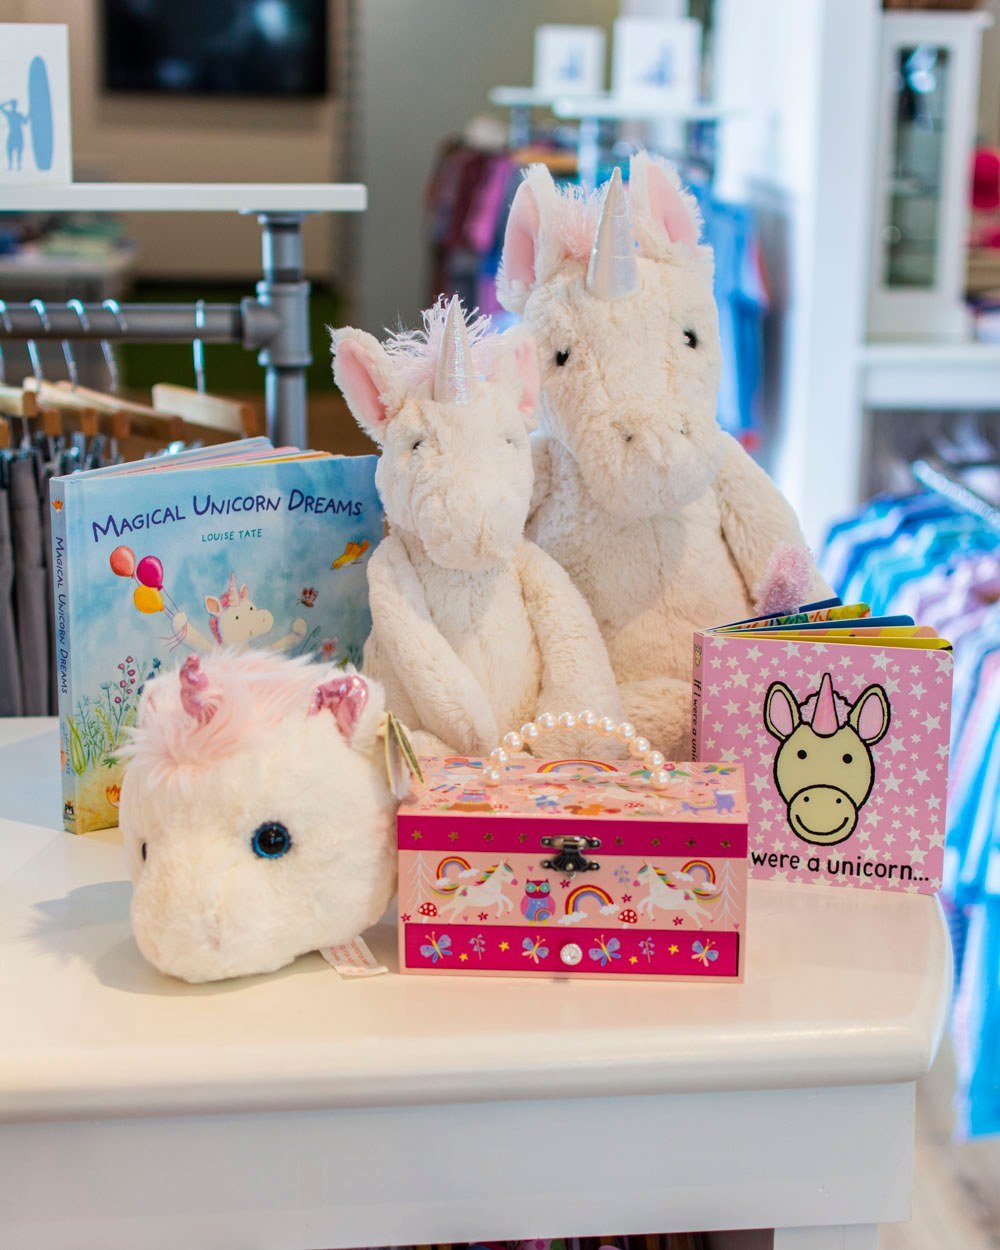 We spy some unicorns around our shop. See where they might be hiding! 🦄🦄🦄